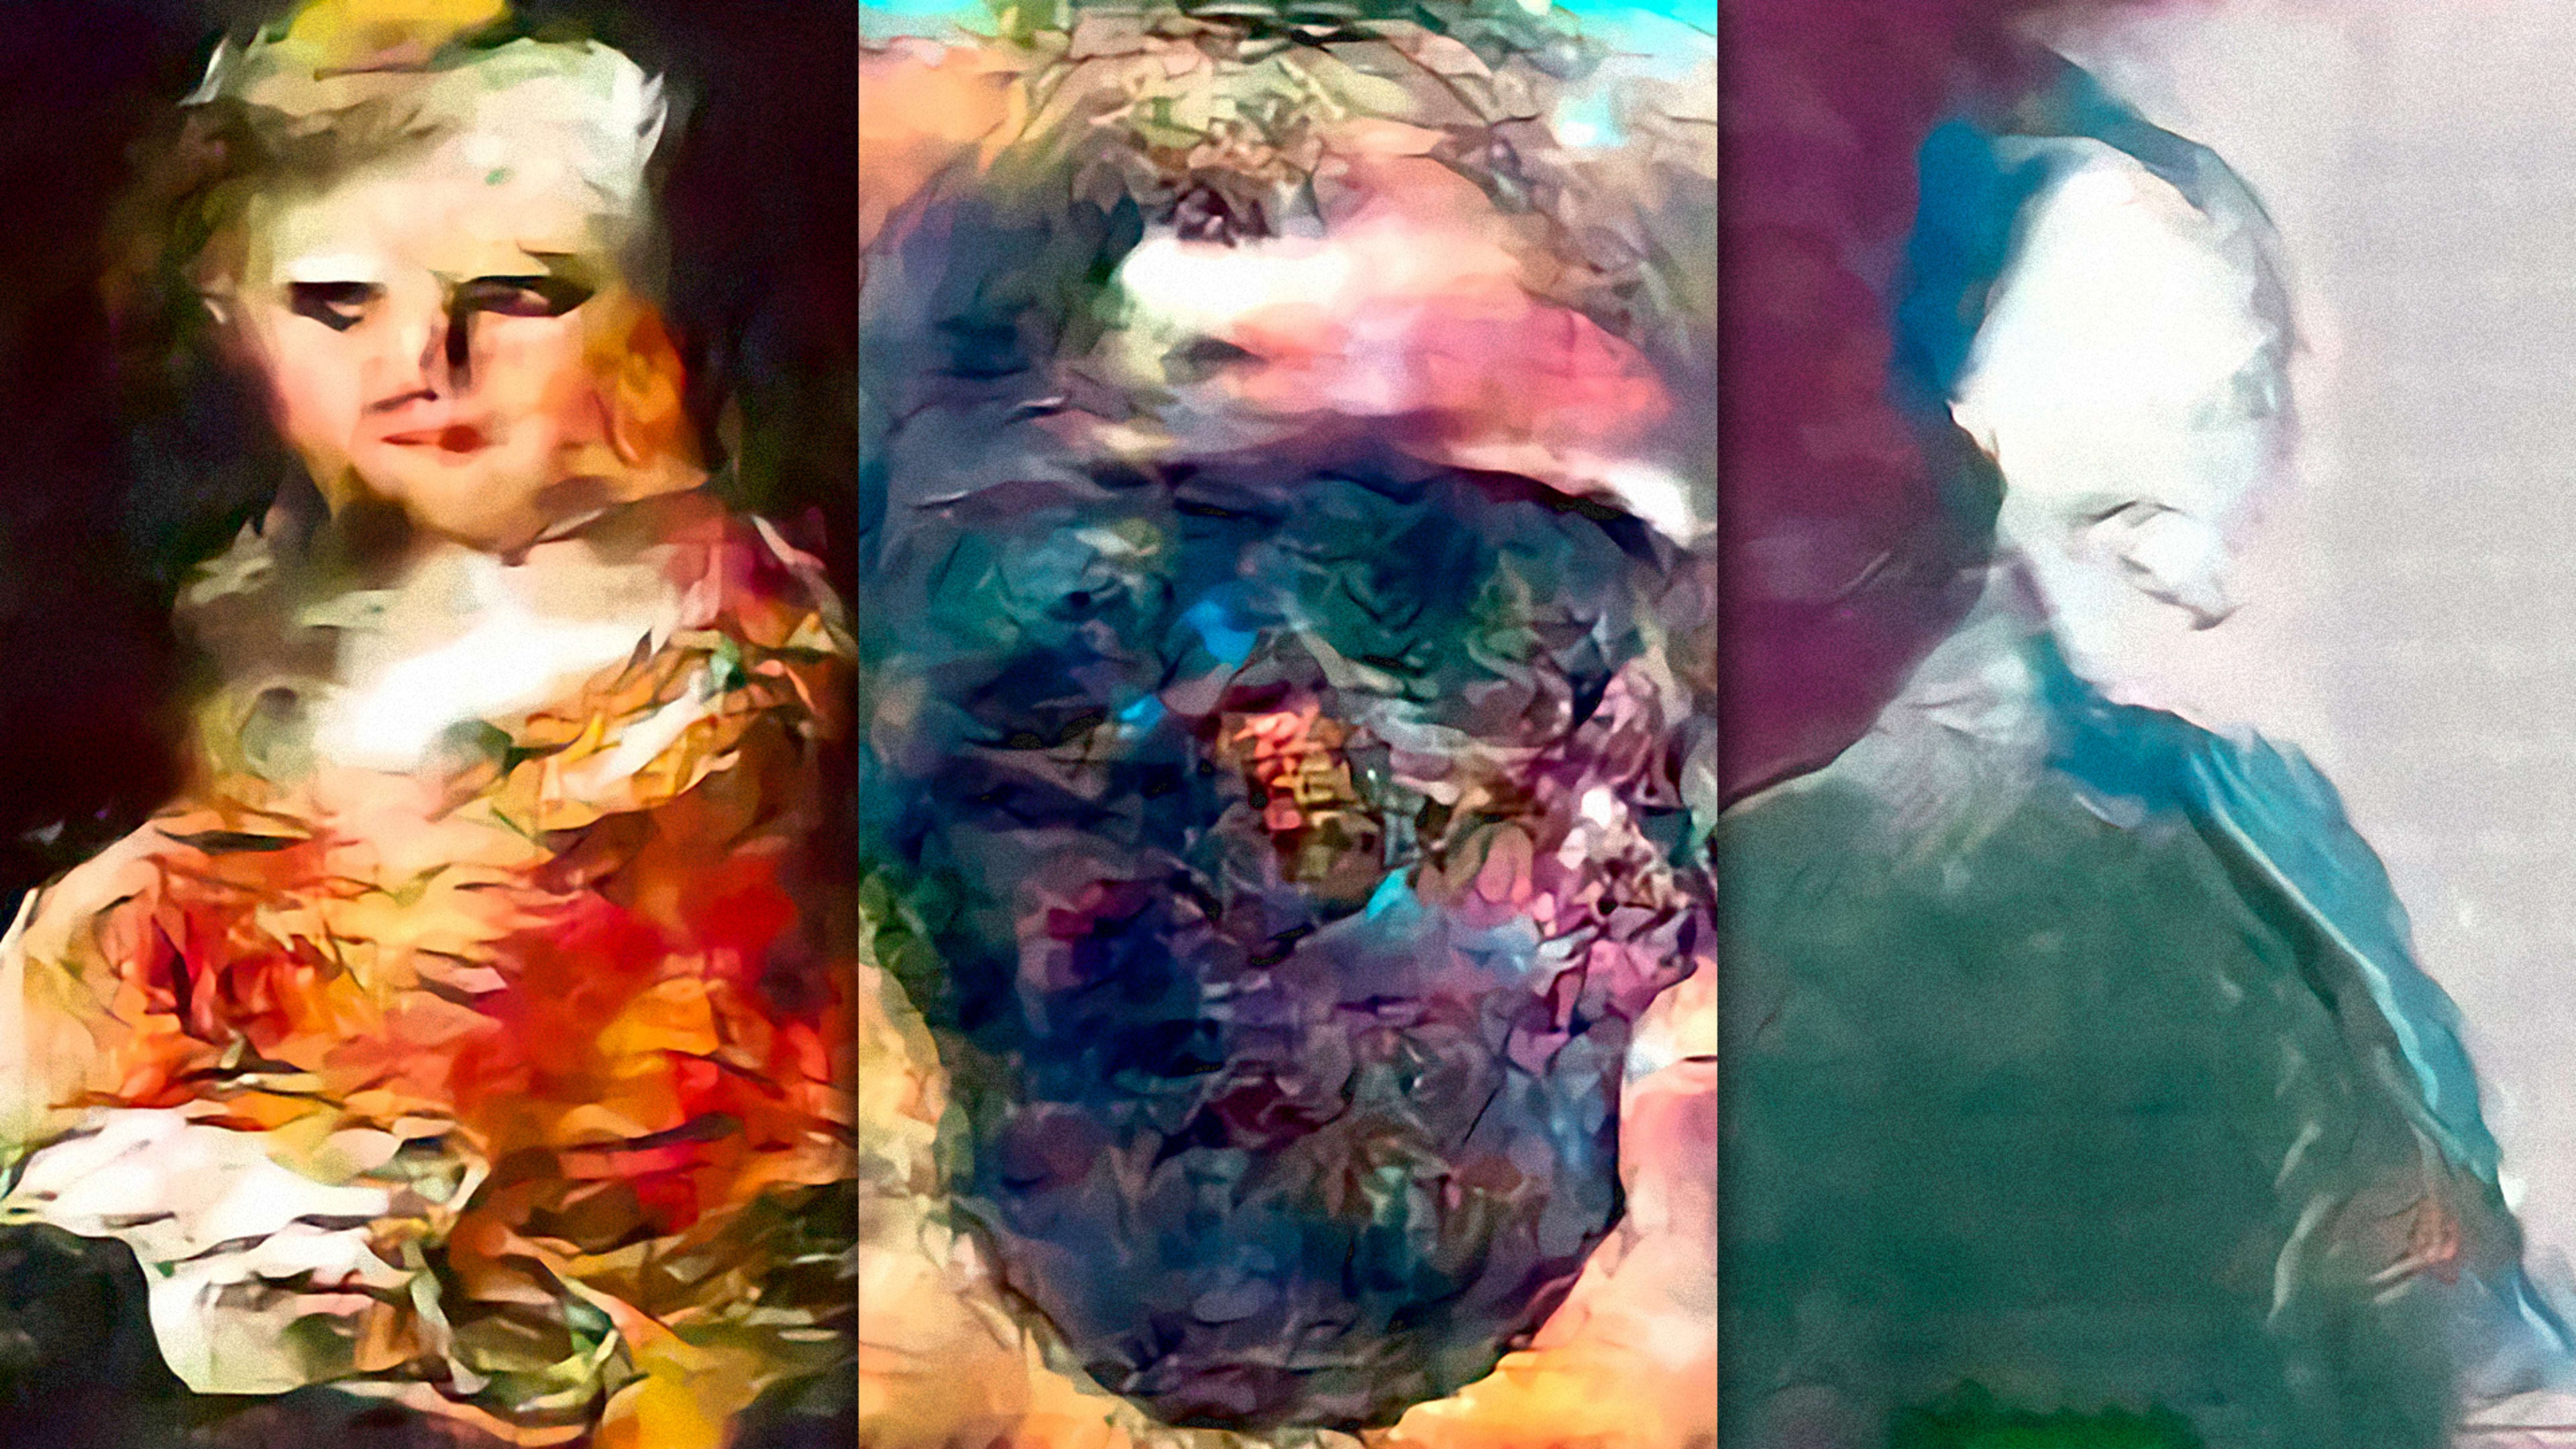 These eerie portraits were painted by a very disturbed AI